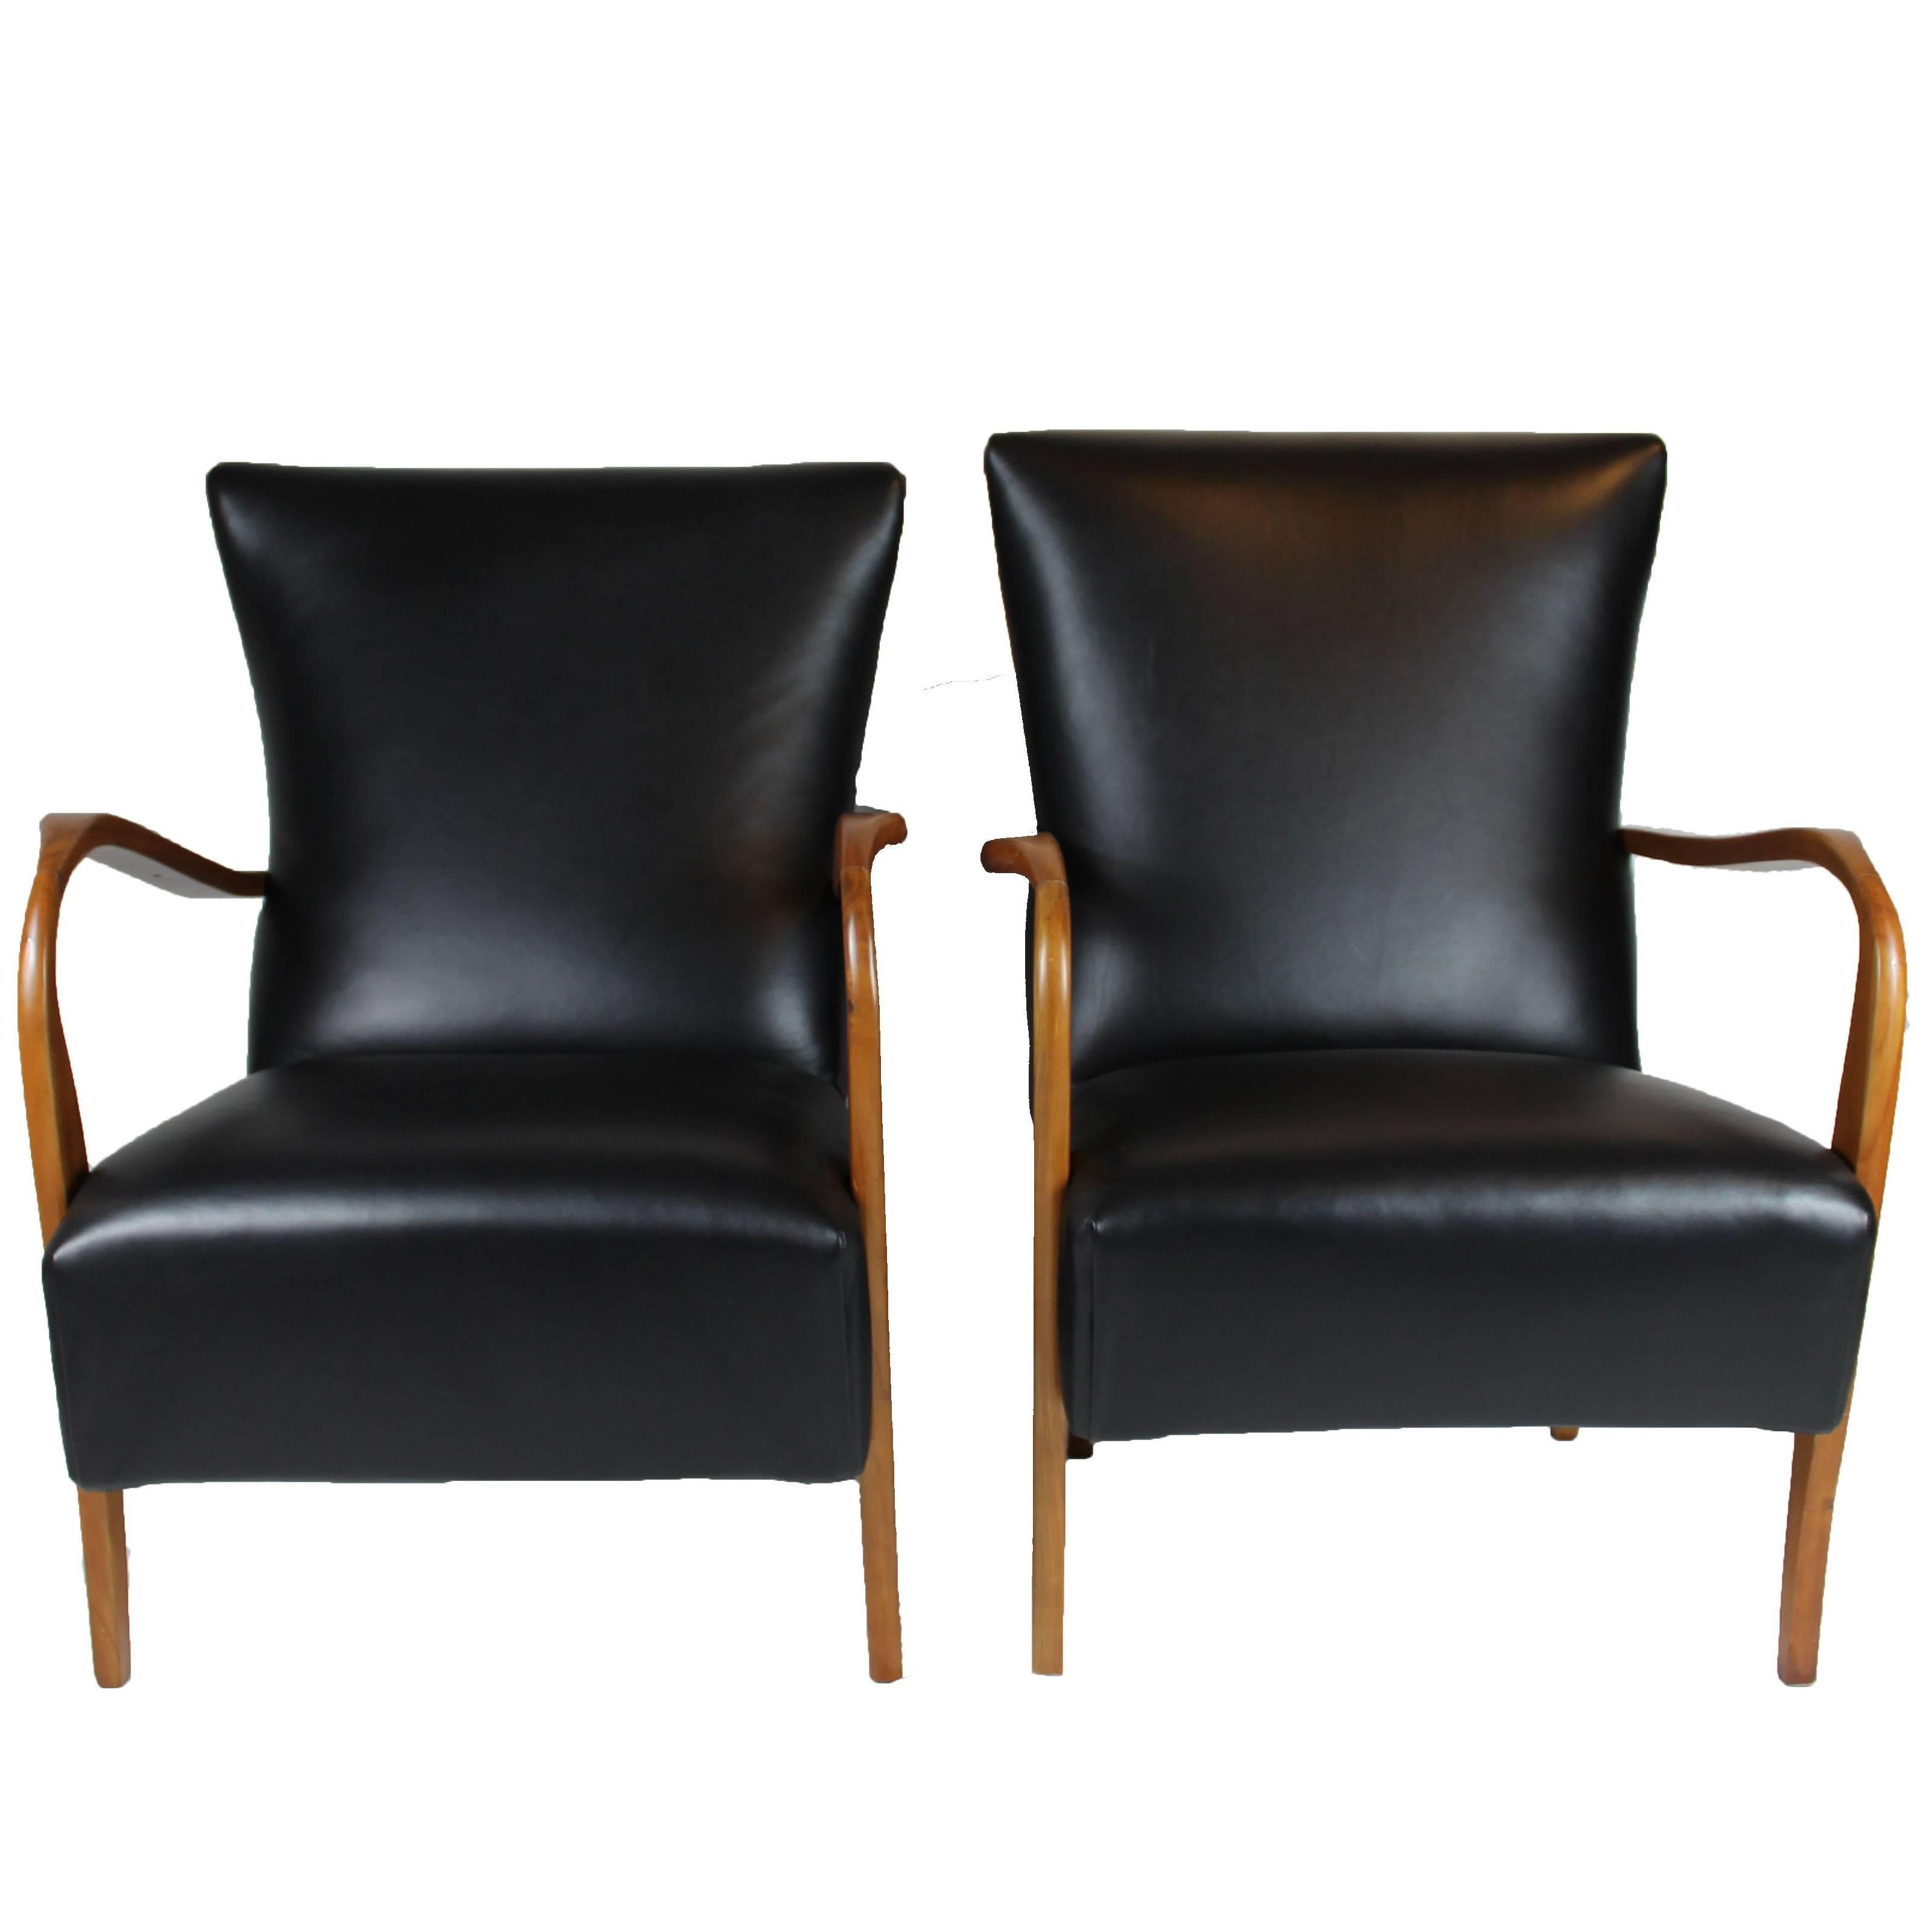 Italian Black Leather Pair of Armchairs, 1950s For Sale